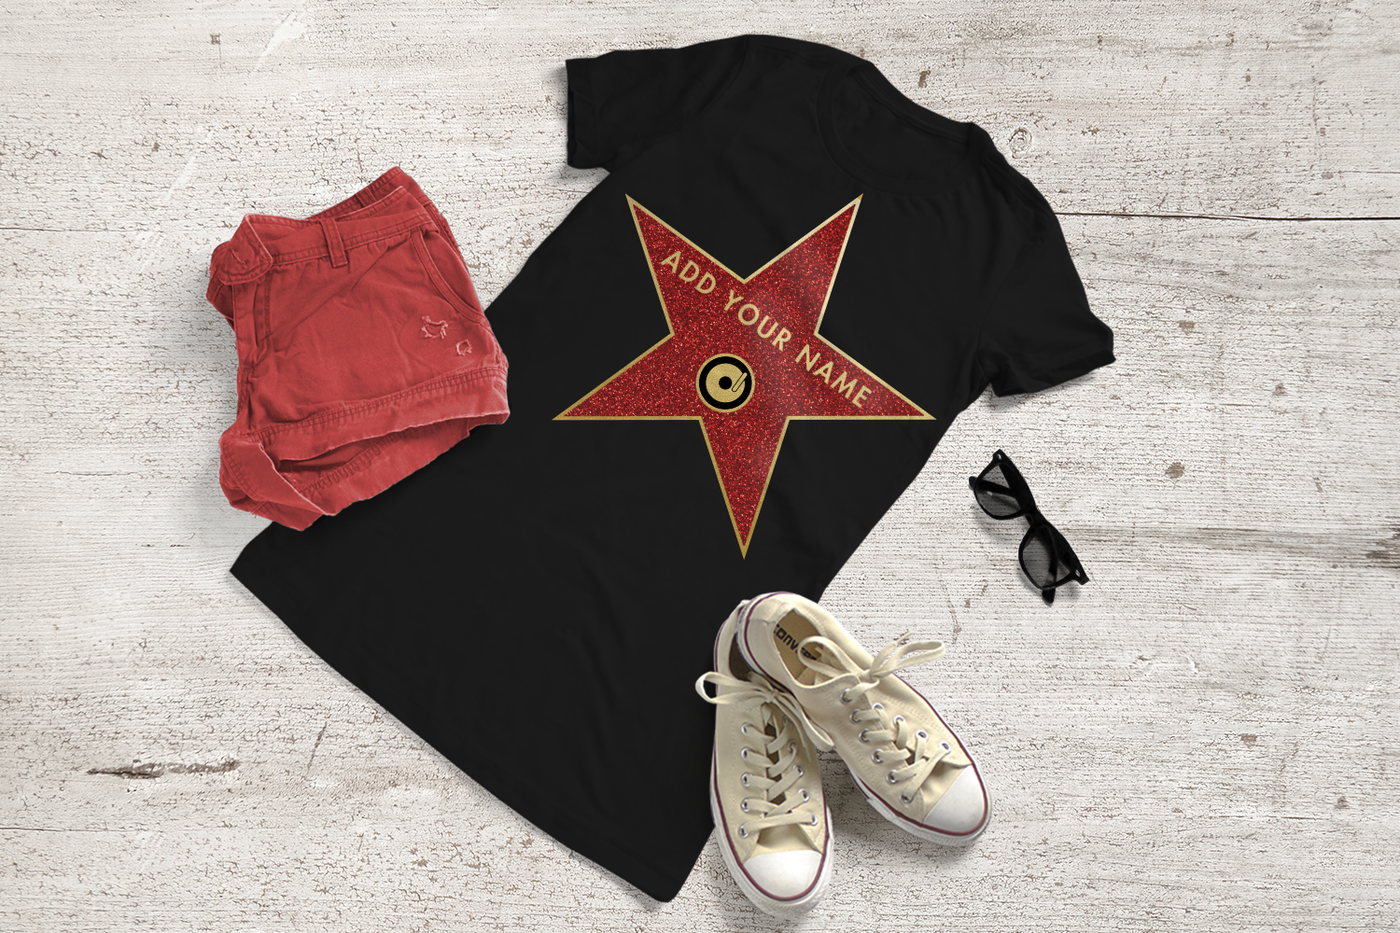 Black tee with a red and gold star. Center has a record icon and in gold it says "add your name."